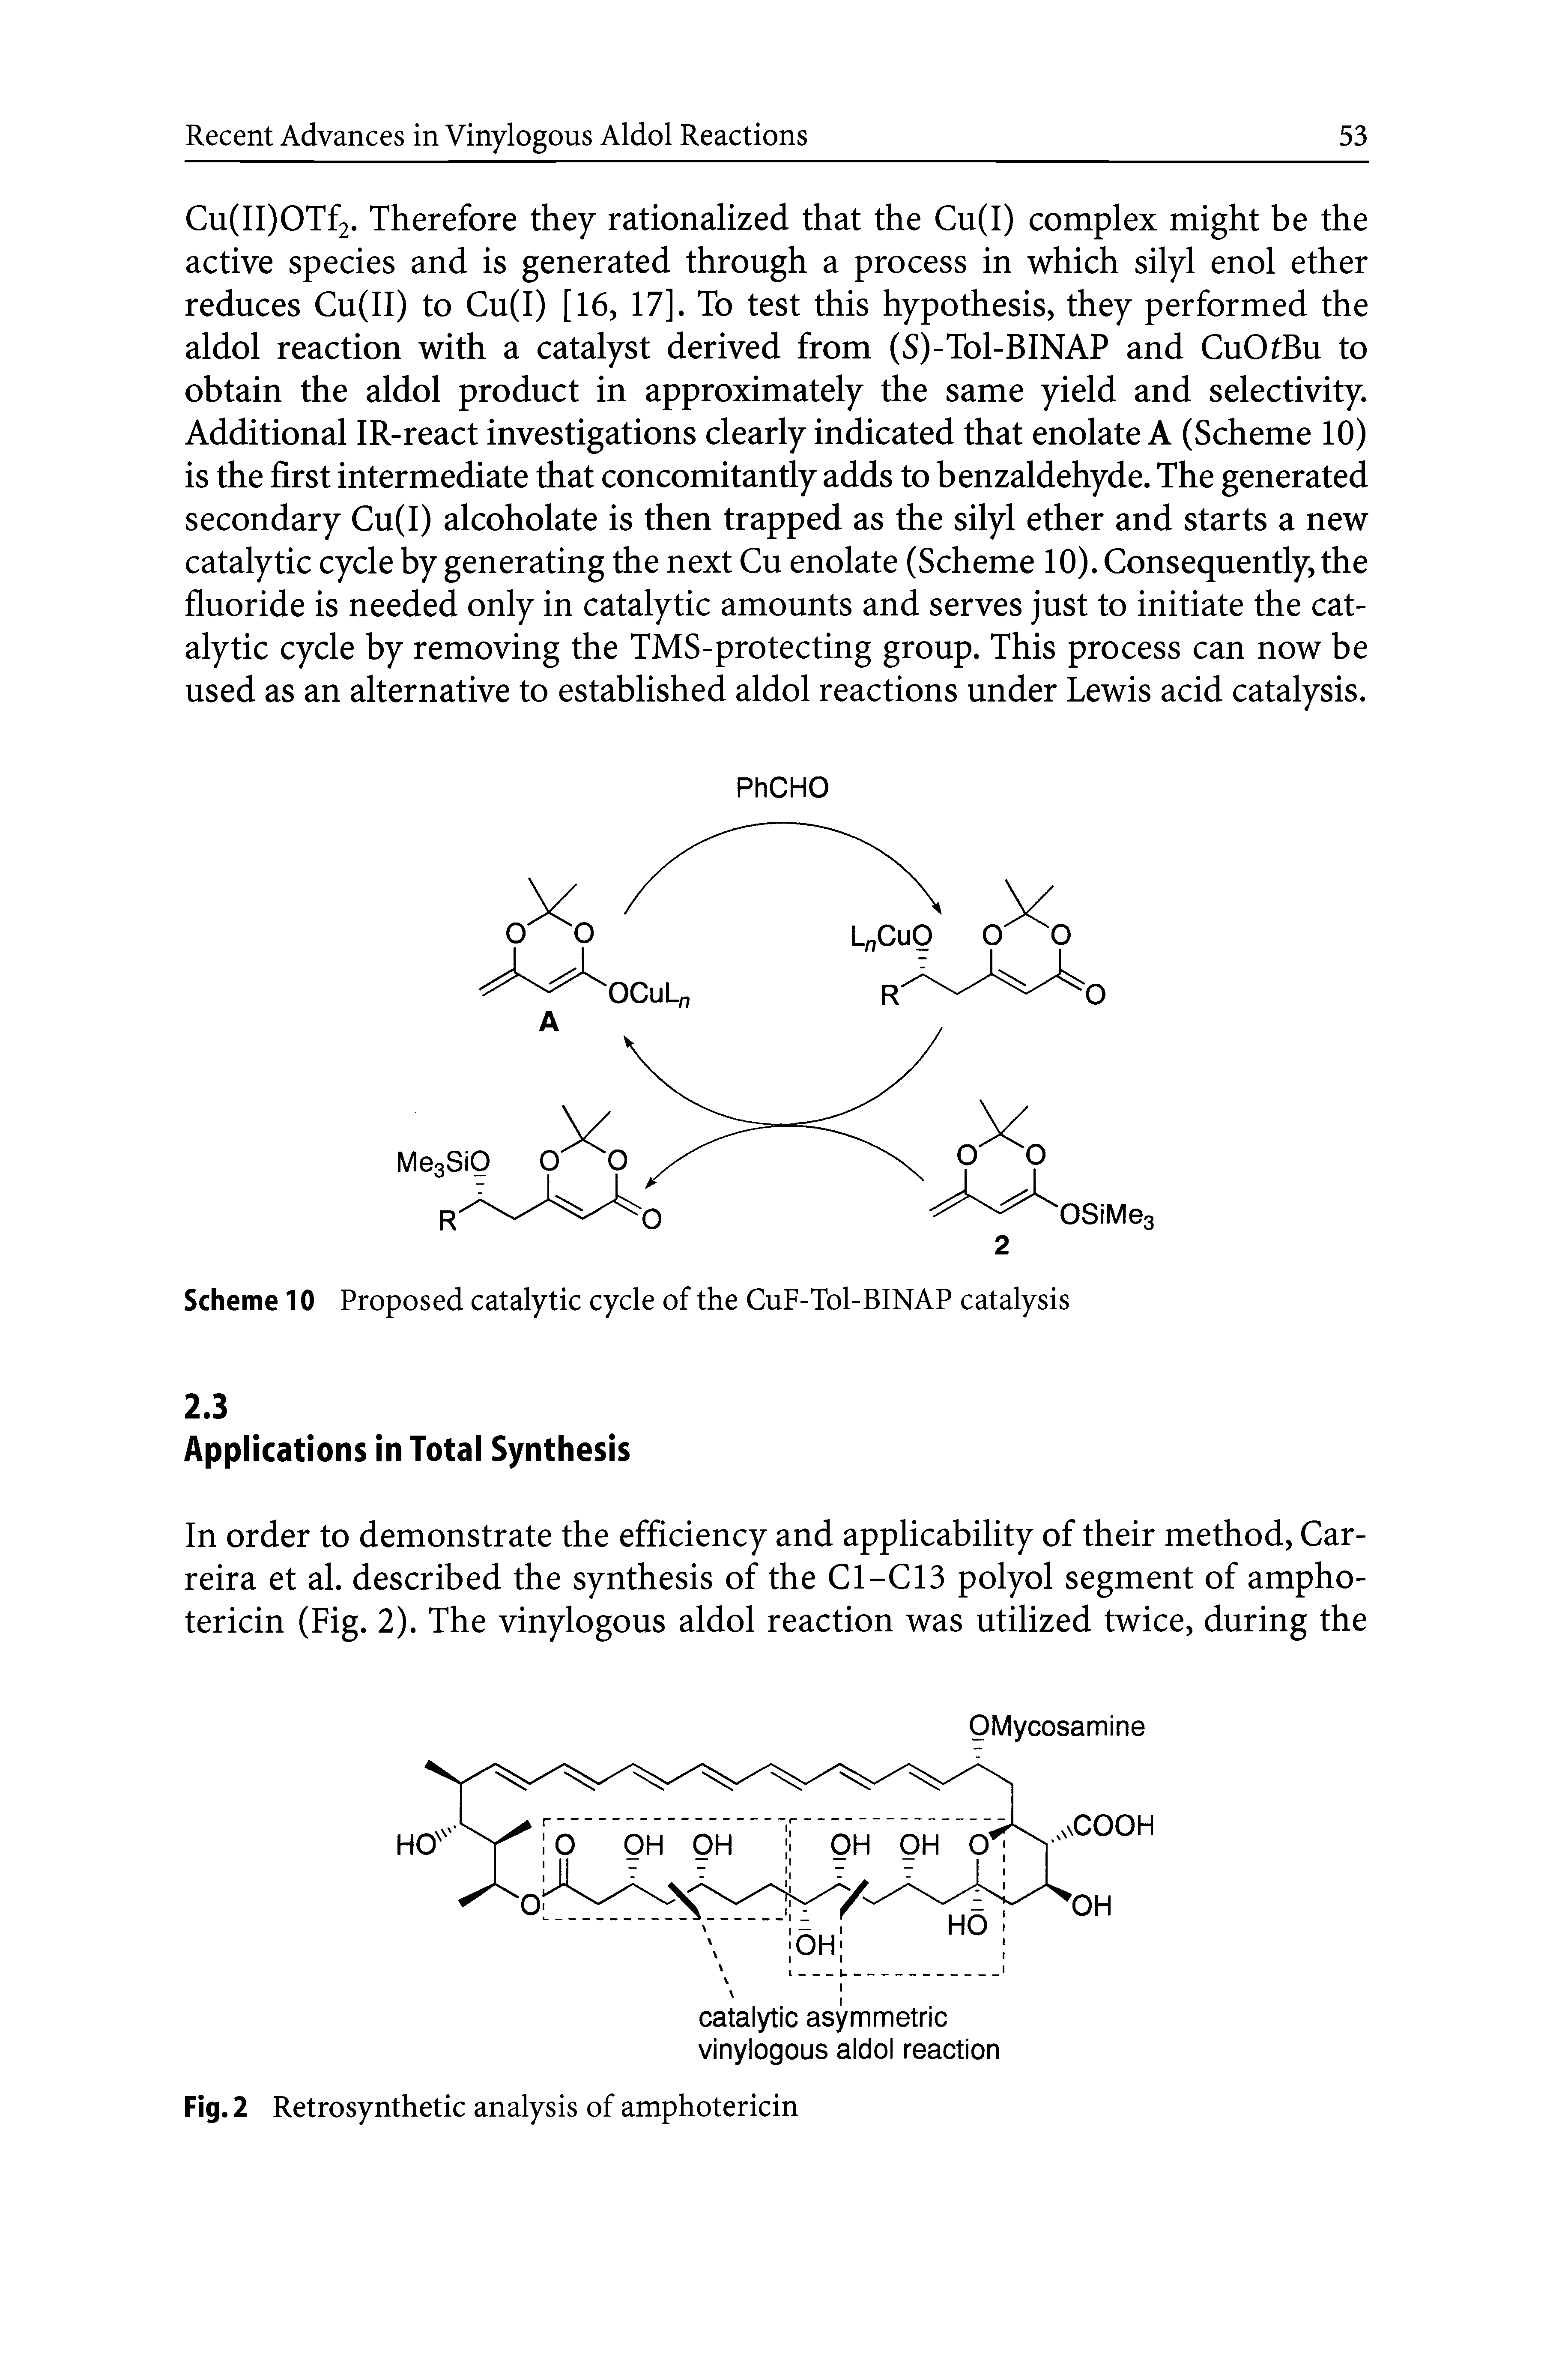 Scheme 10 Proposed catalytic cycle of the CuF-Tol-BINAP catalysis...